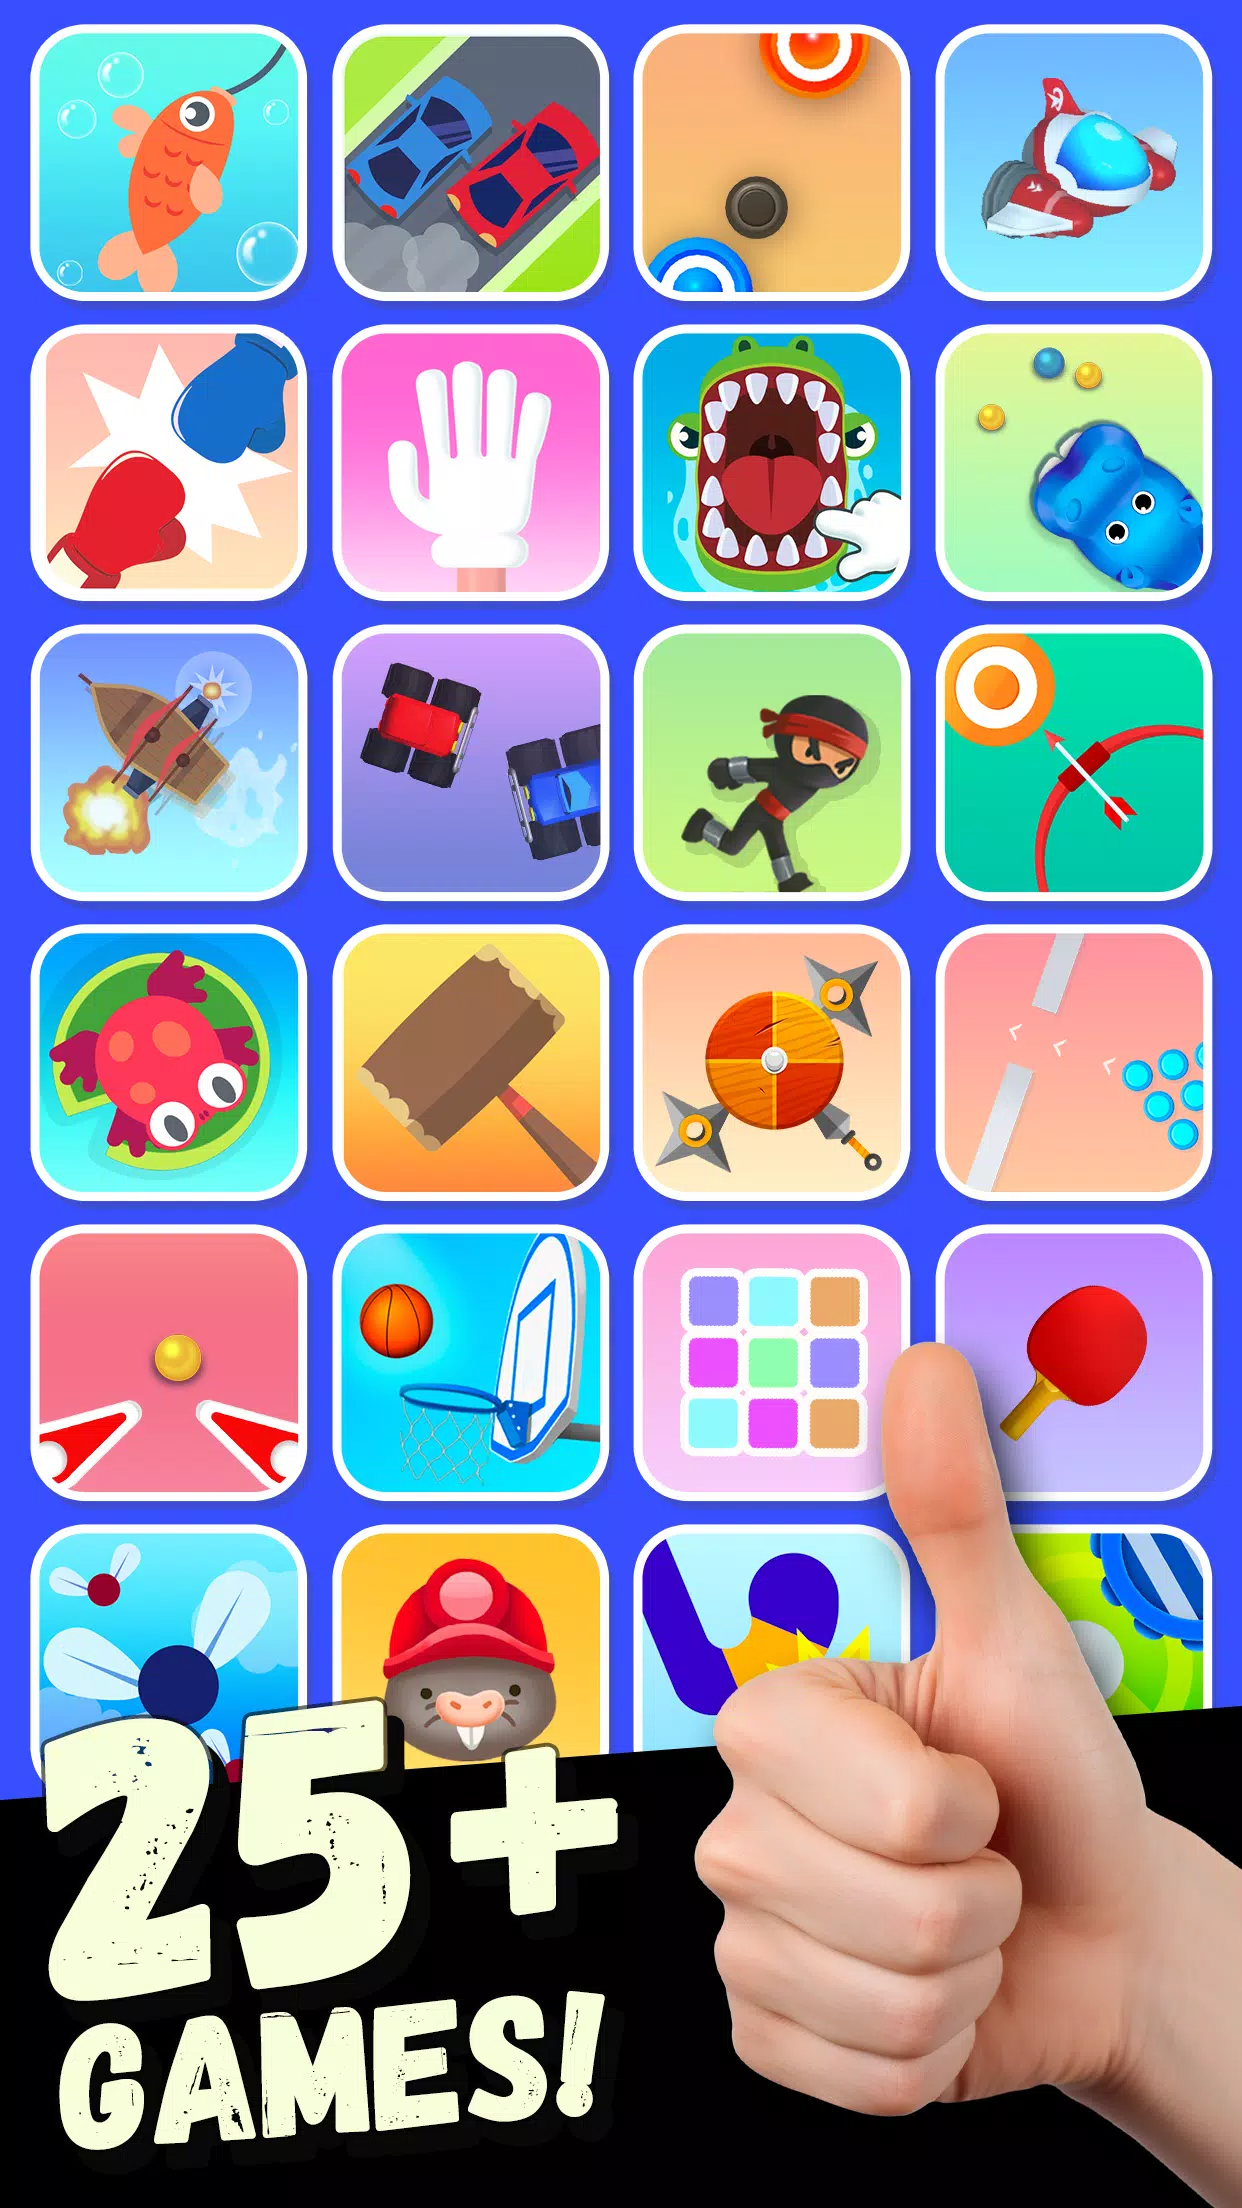 Let's Play - TwoPlayerGames 2 3 4 Player Mini Party Games - IOS